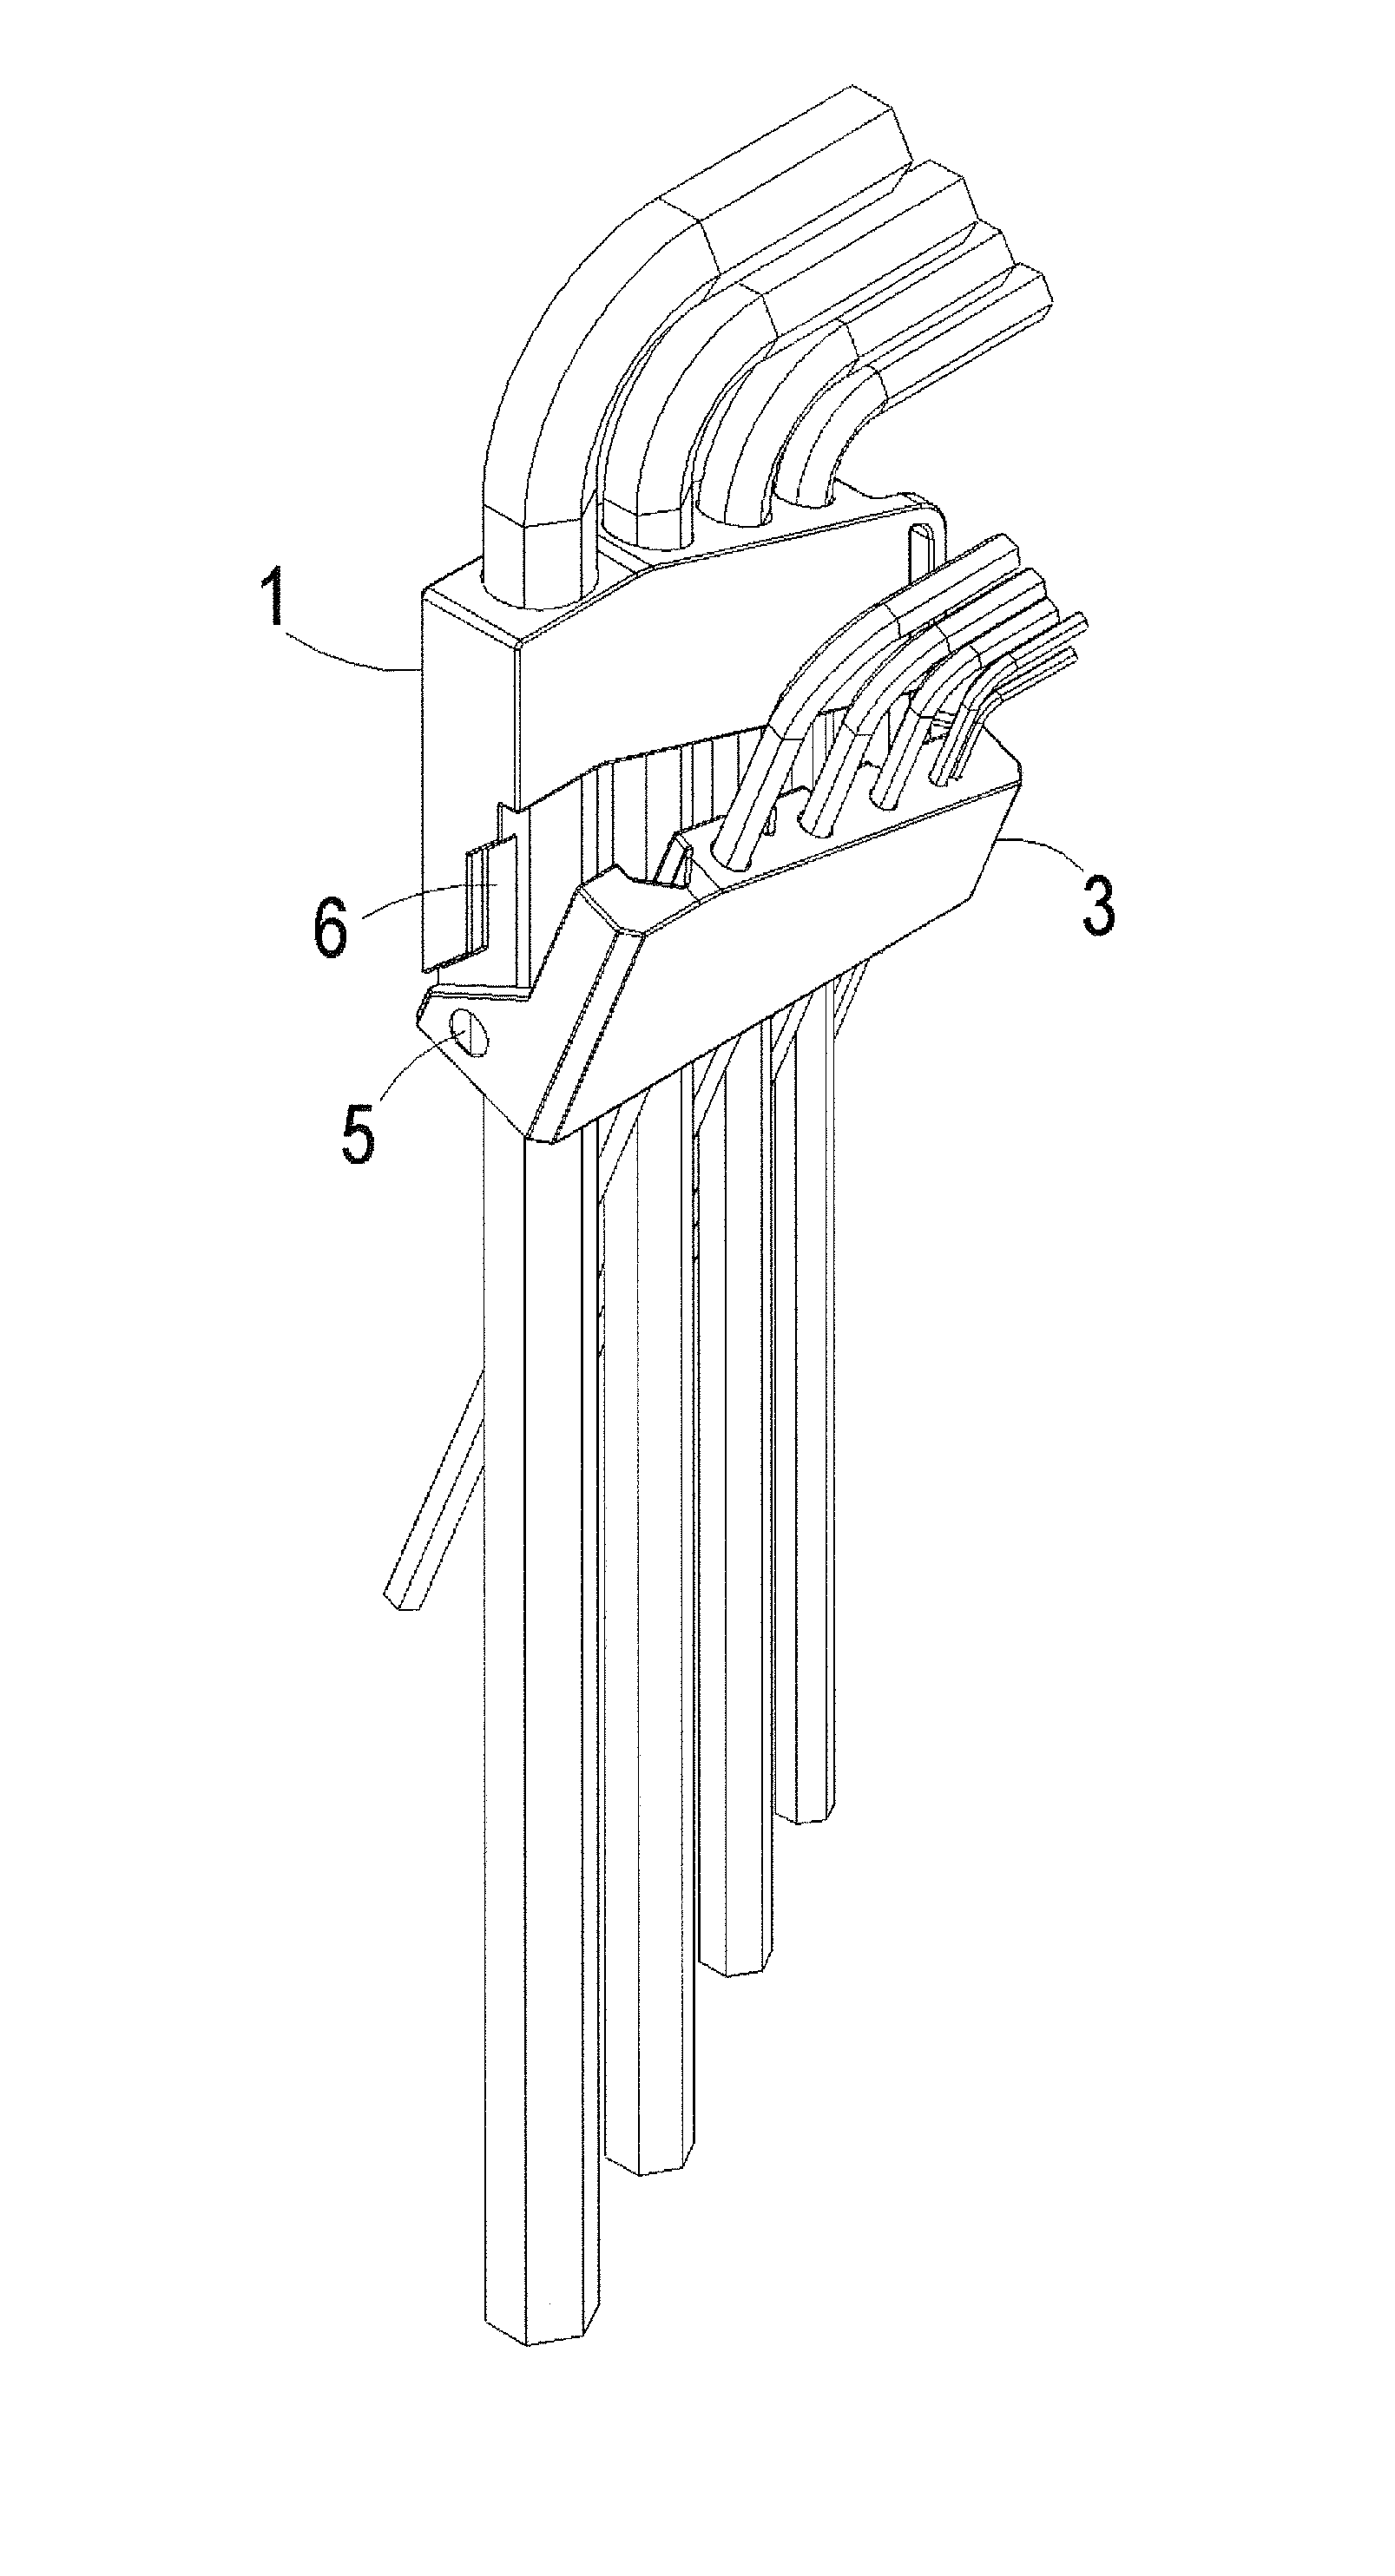 Structure of Tool Holding Sheath Cross Reference To Related Application